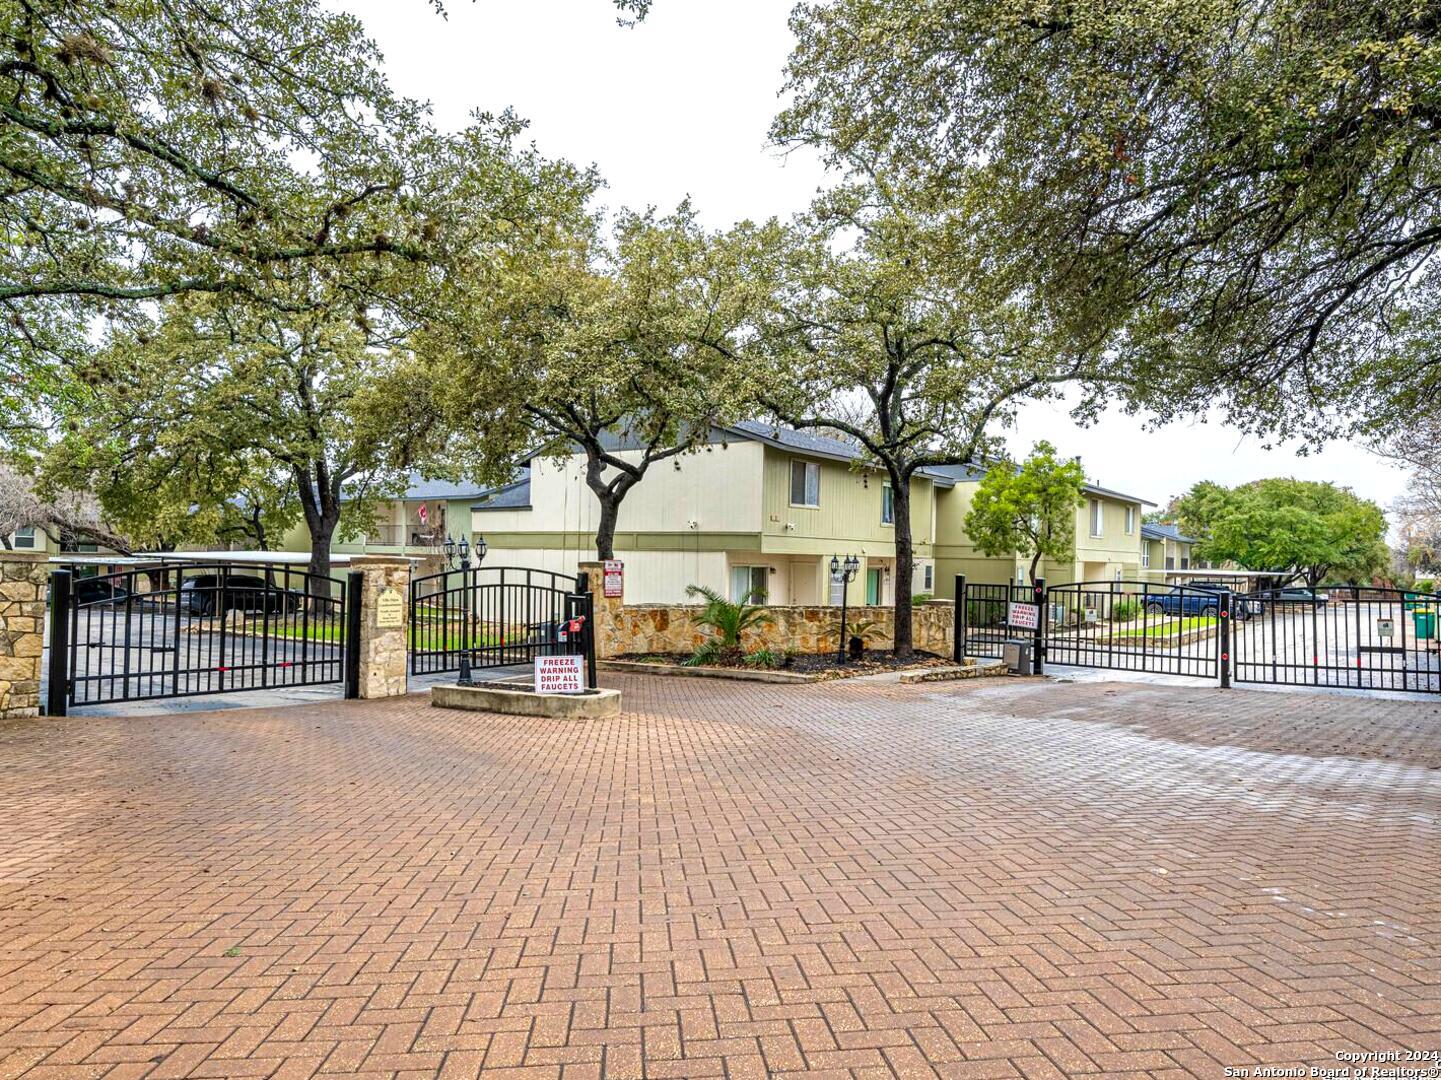 Don't miss out on this elegant top-floor newly updated 3 bedroom 2 full bath condo nestled in the highly desirable Alamo Heights neighborhood with award winning schools. This charming condo maximizes home safety, comfort, and carefree maintenance. Newly painted floors, ceilings, cabinets and doors.  Kitchen includes smooth top electric range, microwave, dishwasher, and refrigerator. The cozy kitchen and bathrooms have granite countertops, wood flooring, exquisite tile shower walls, and no carpet in the unit. The assigned covered parking space can be seen from the unit. Unit has a beautiful spacious balcony A short walk to cool off in the community pool for swimming days and outdoor living. Close to the Alamo Quarry, interstate highways, stores, restaurants, entertainment and more. This unit is perfect for a starter home, investment and is move-in ready.